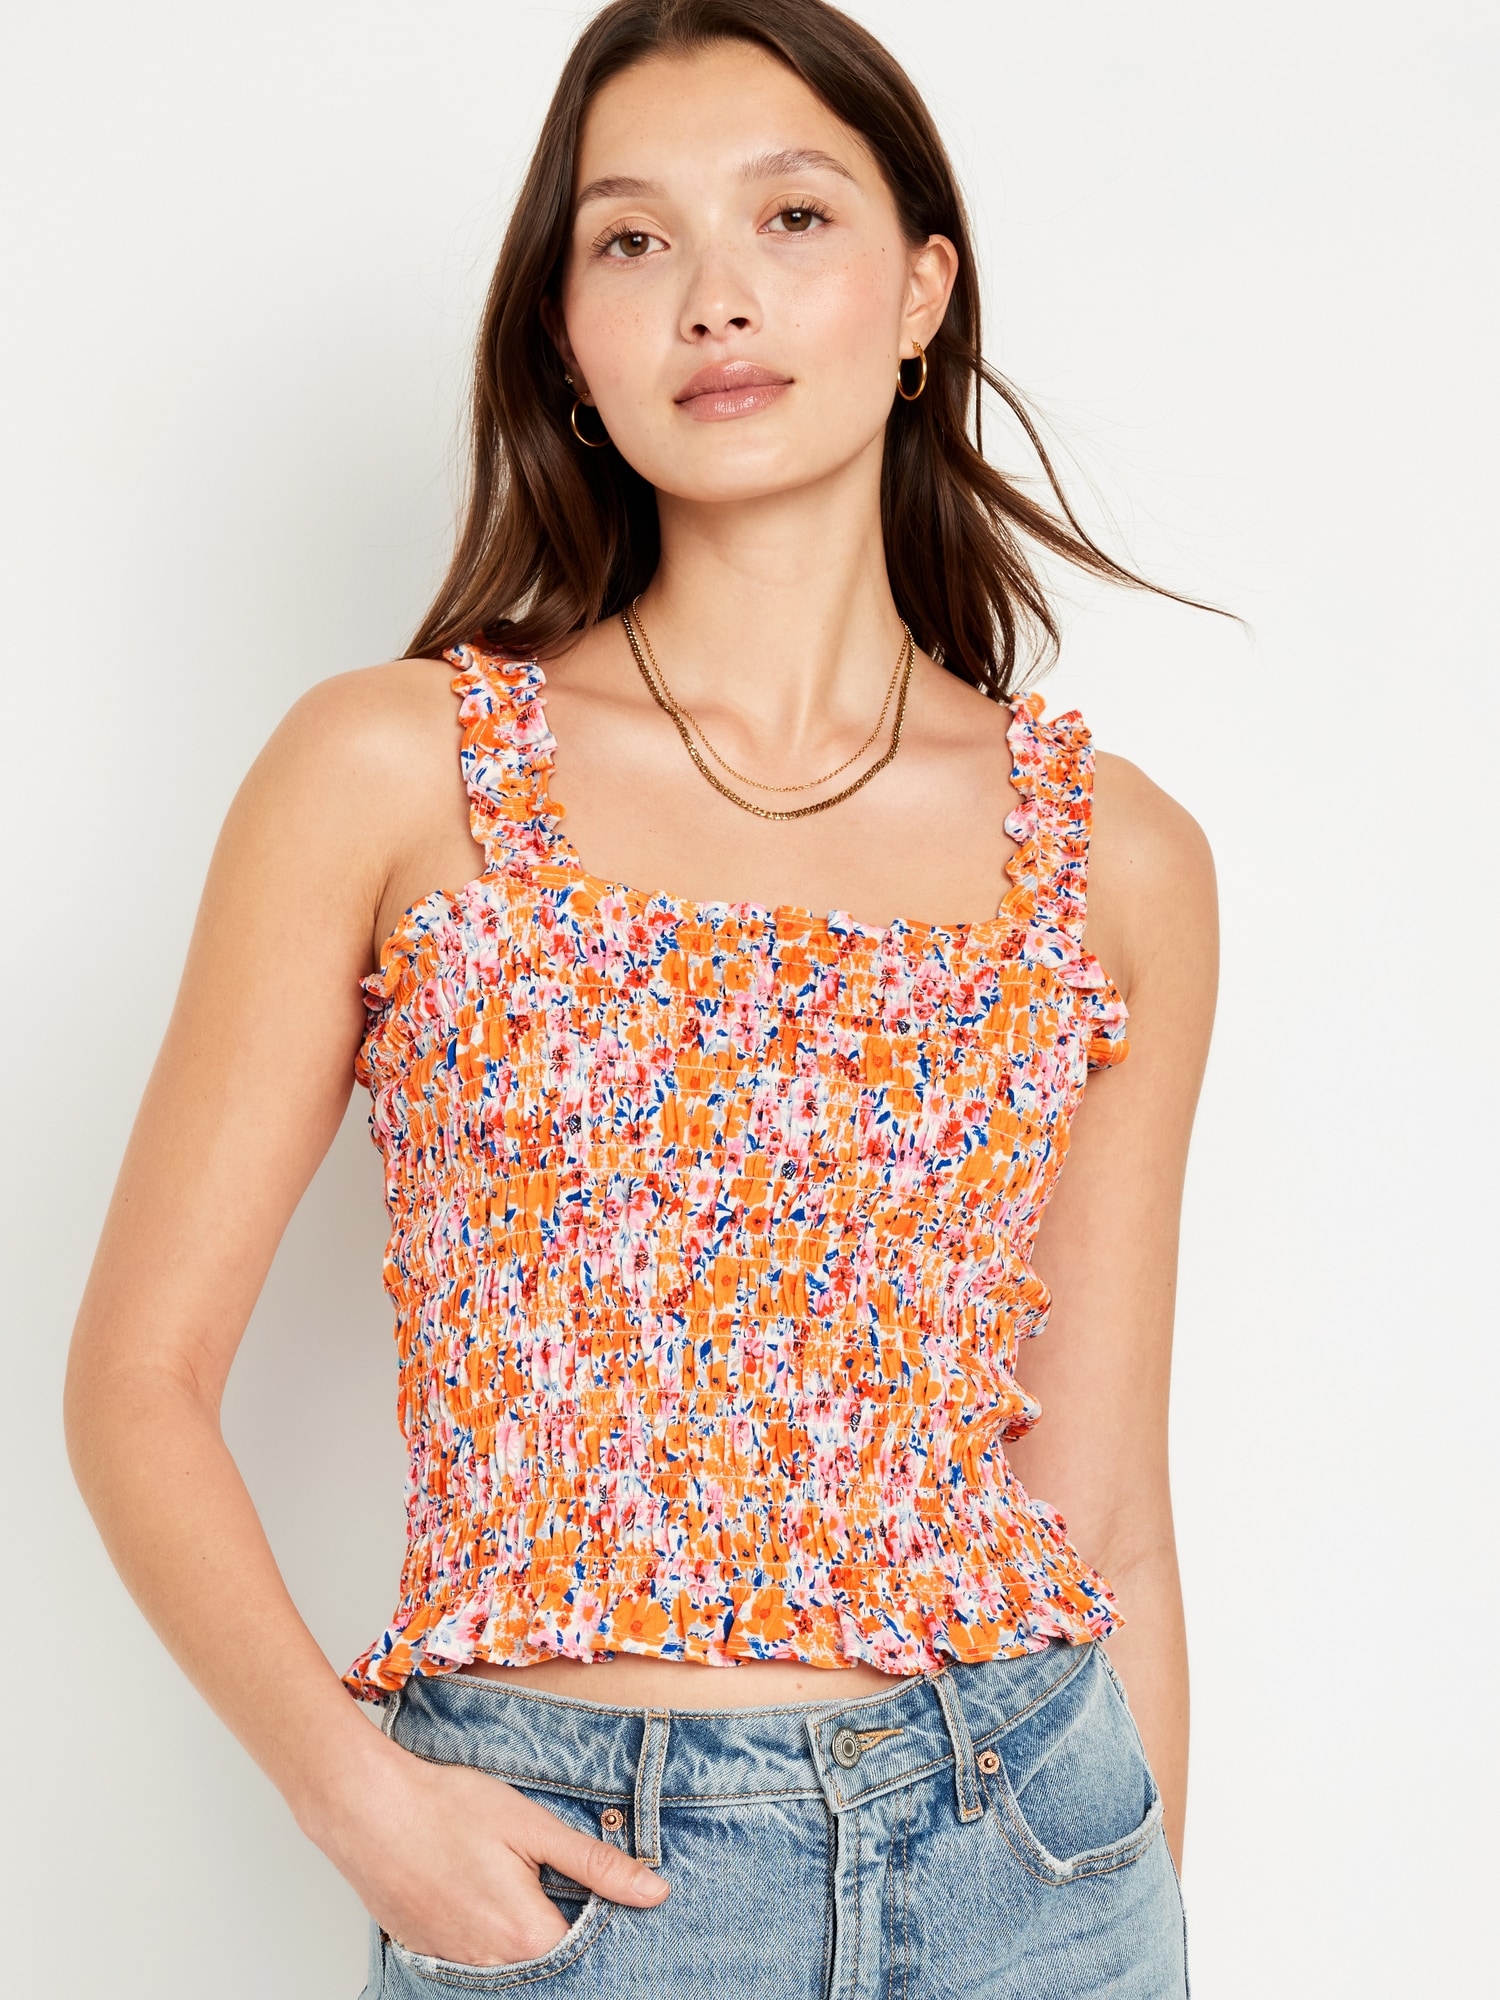  SYCBHSD Women's Summer Casual Cami Top Shirred Back